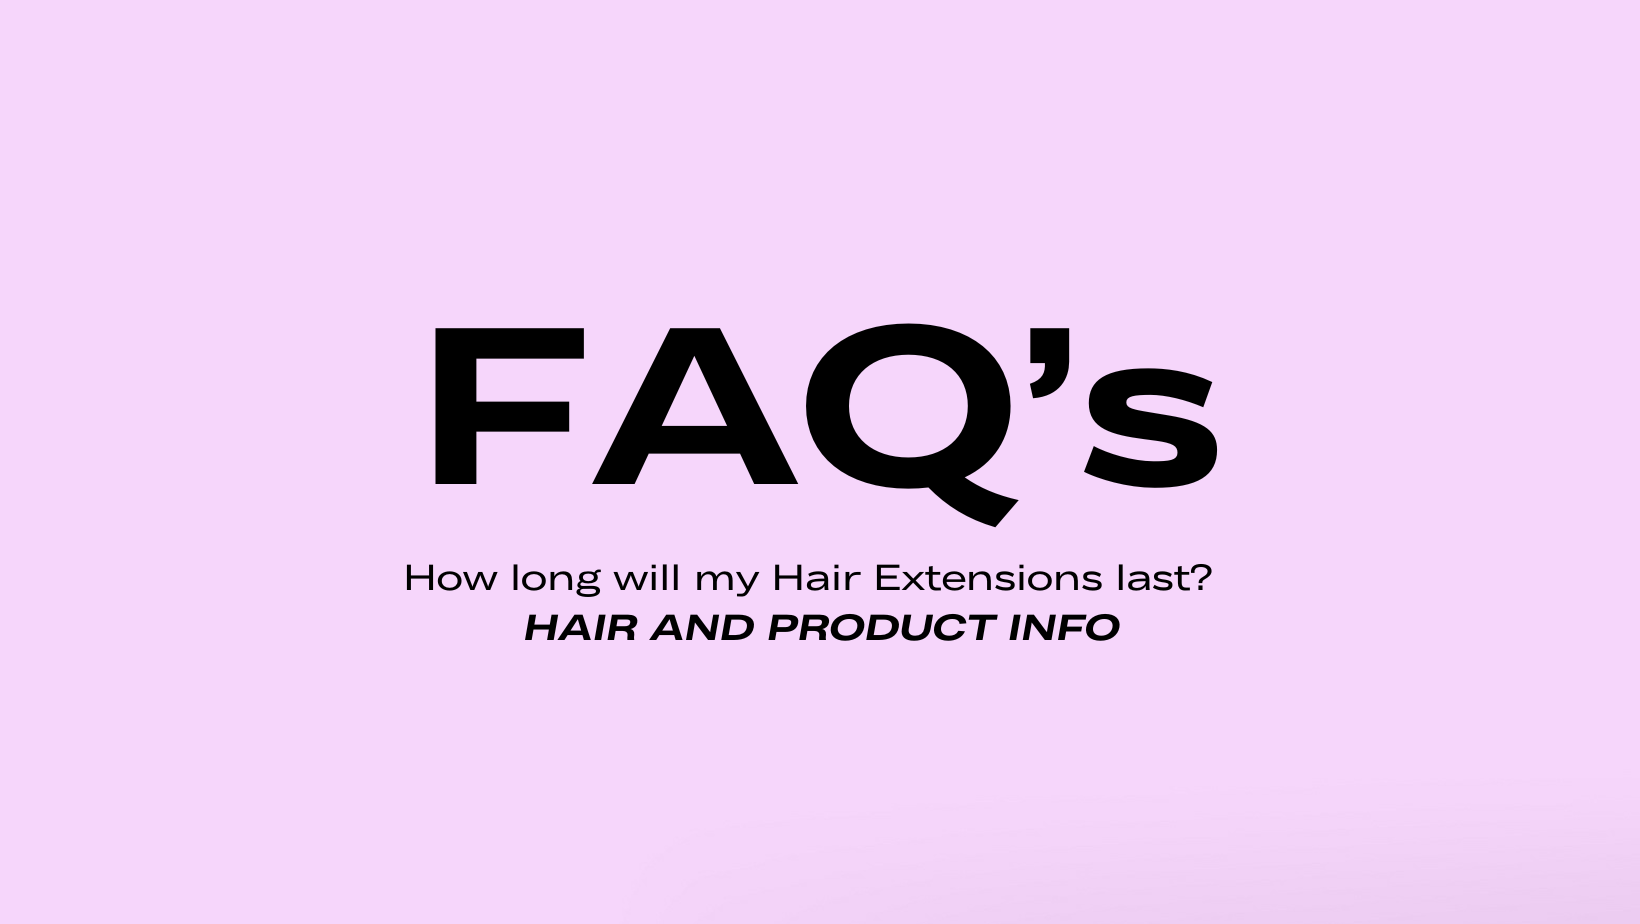 How long will my hair extensions last? Hair Extensions Life , Hair Extensions life expectancy